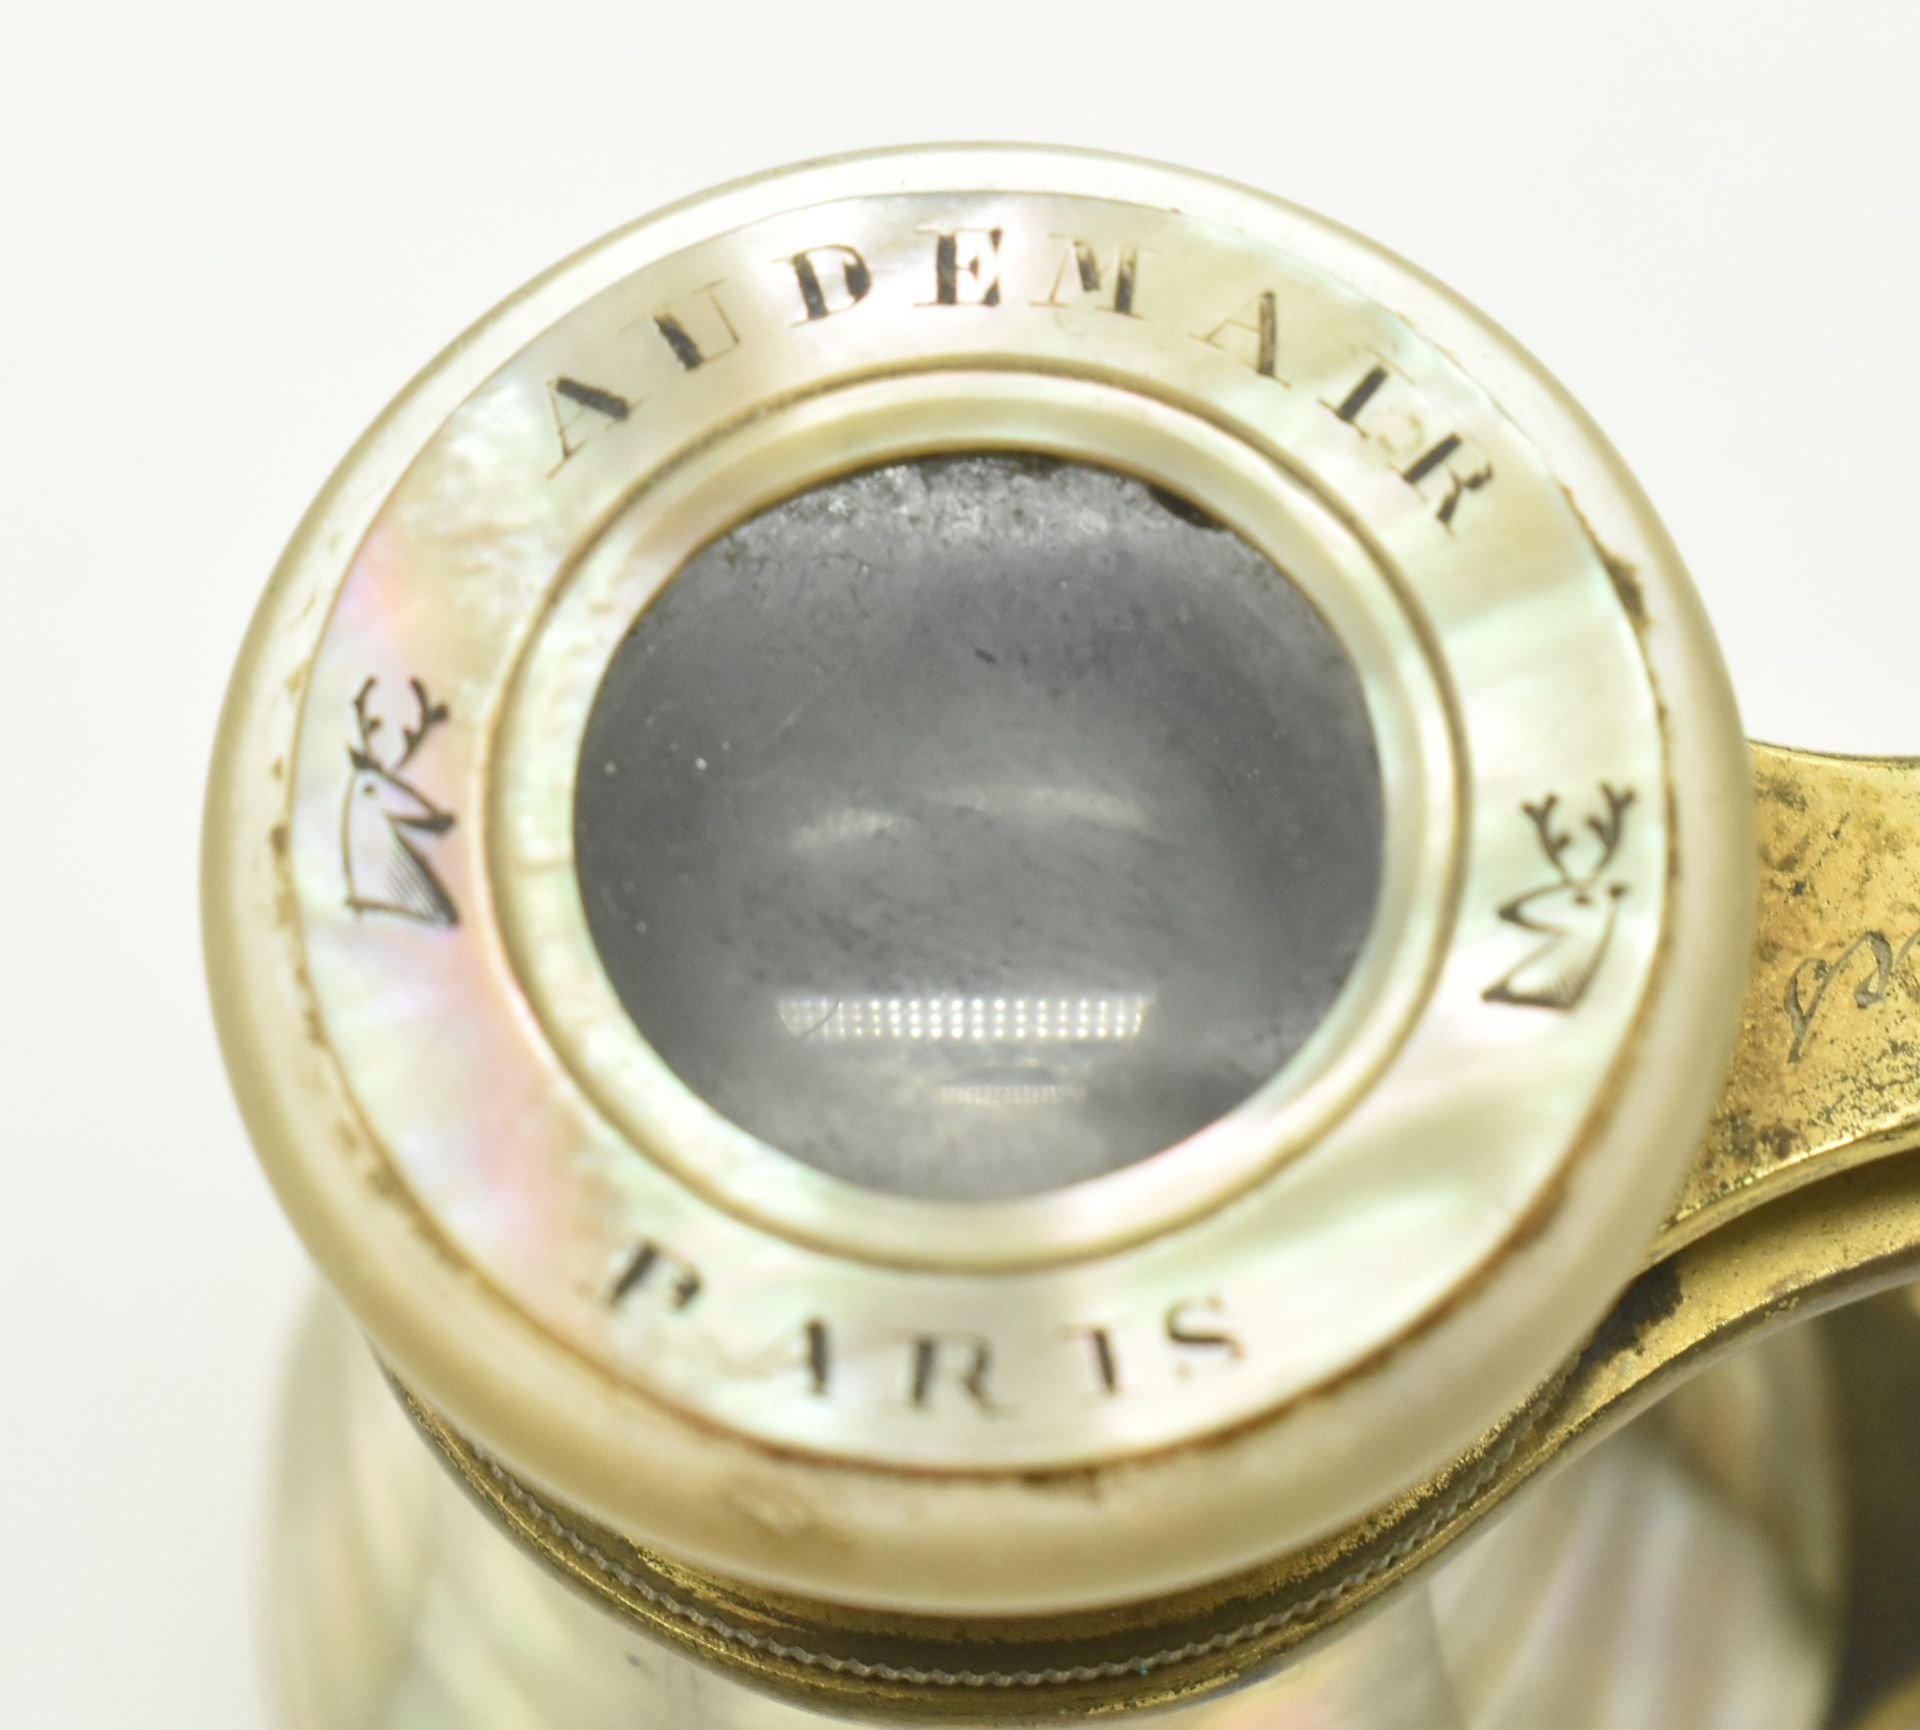 TWO PAIRS OF FRENCH MOTHER OF PEARL OPERA GLASSES - Image 5 of 7